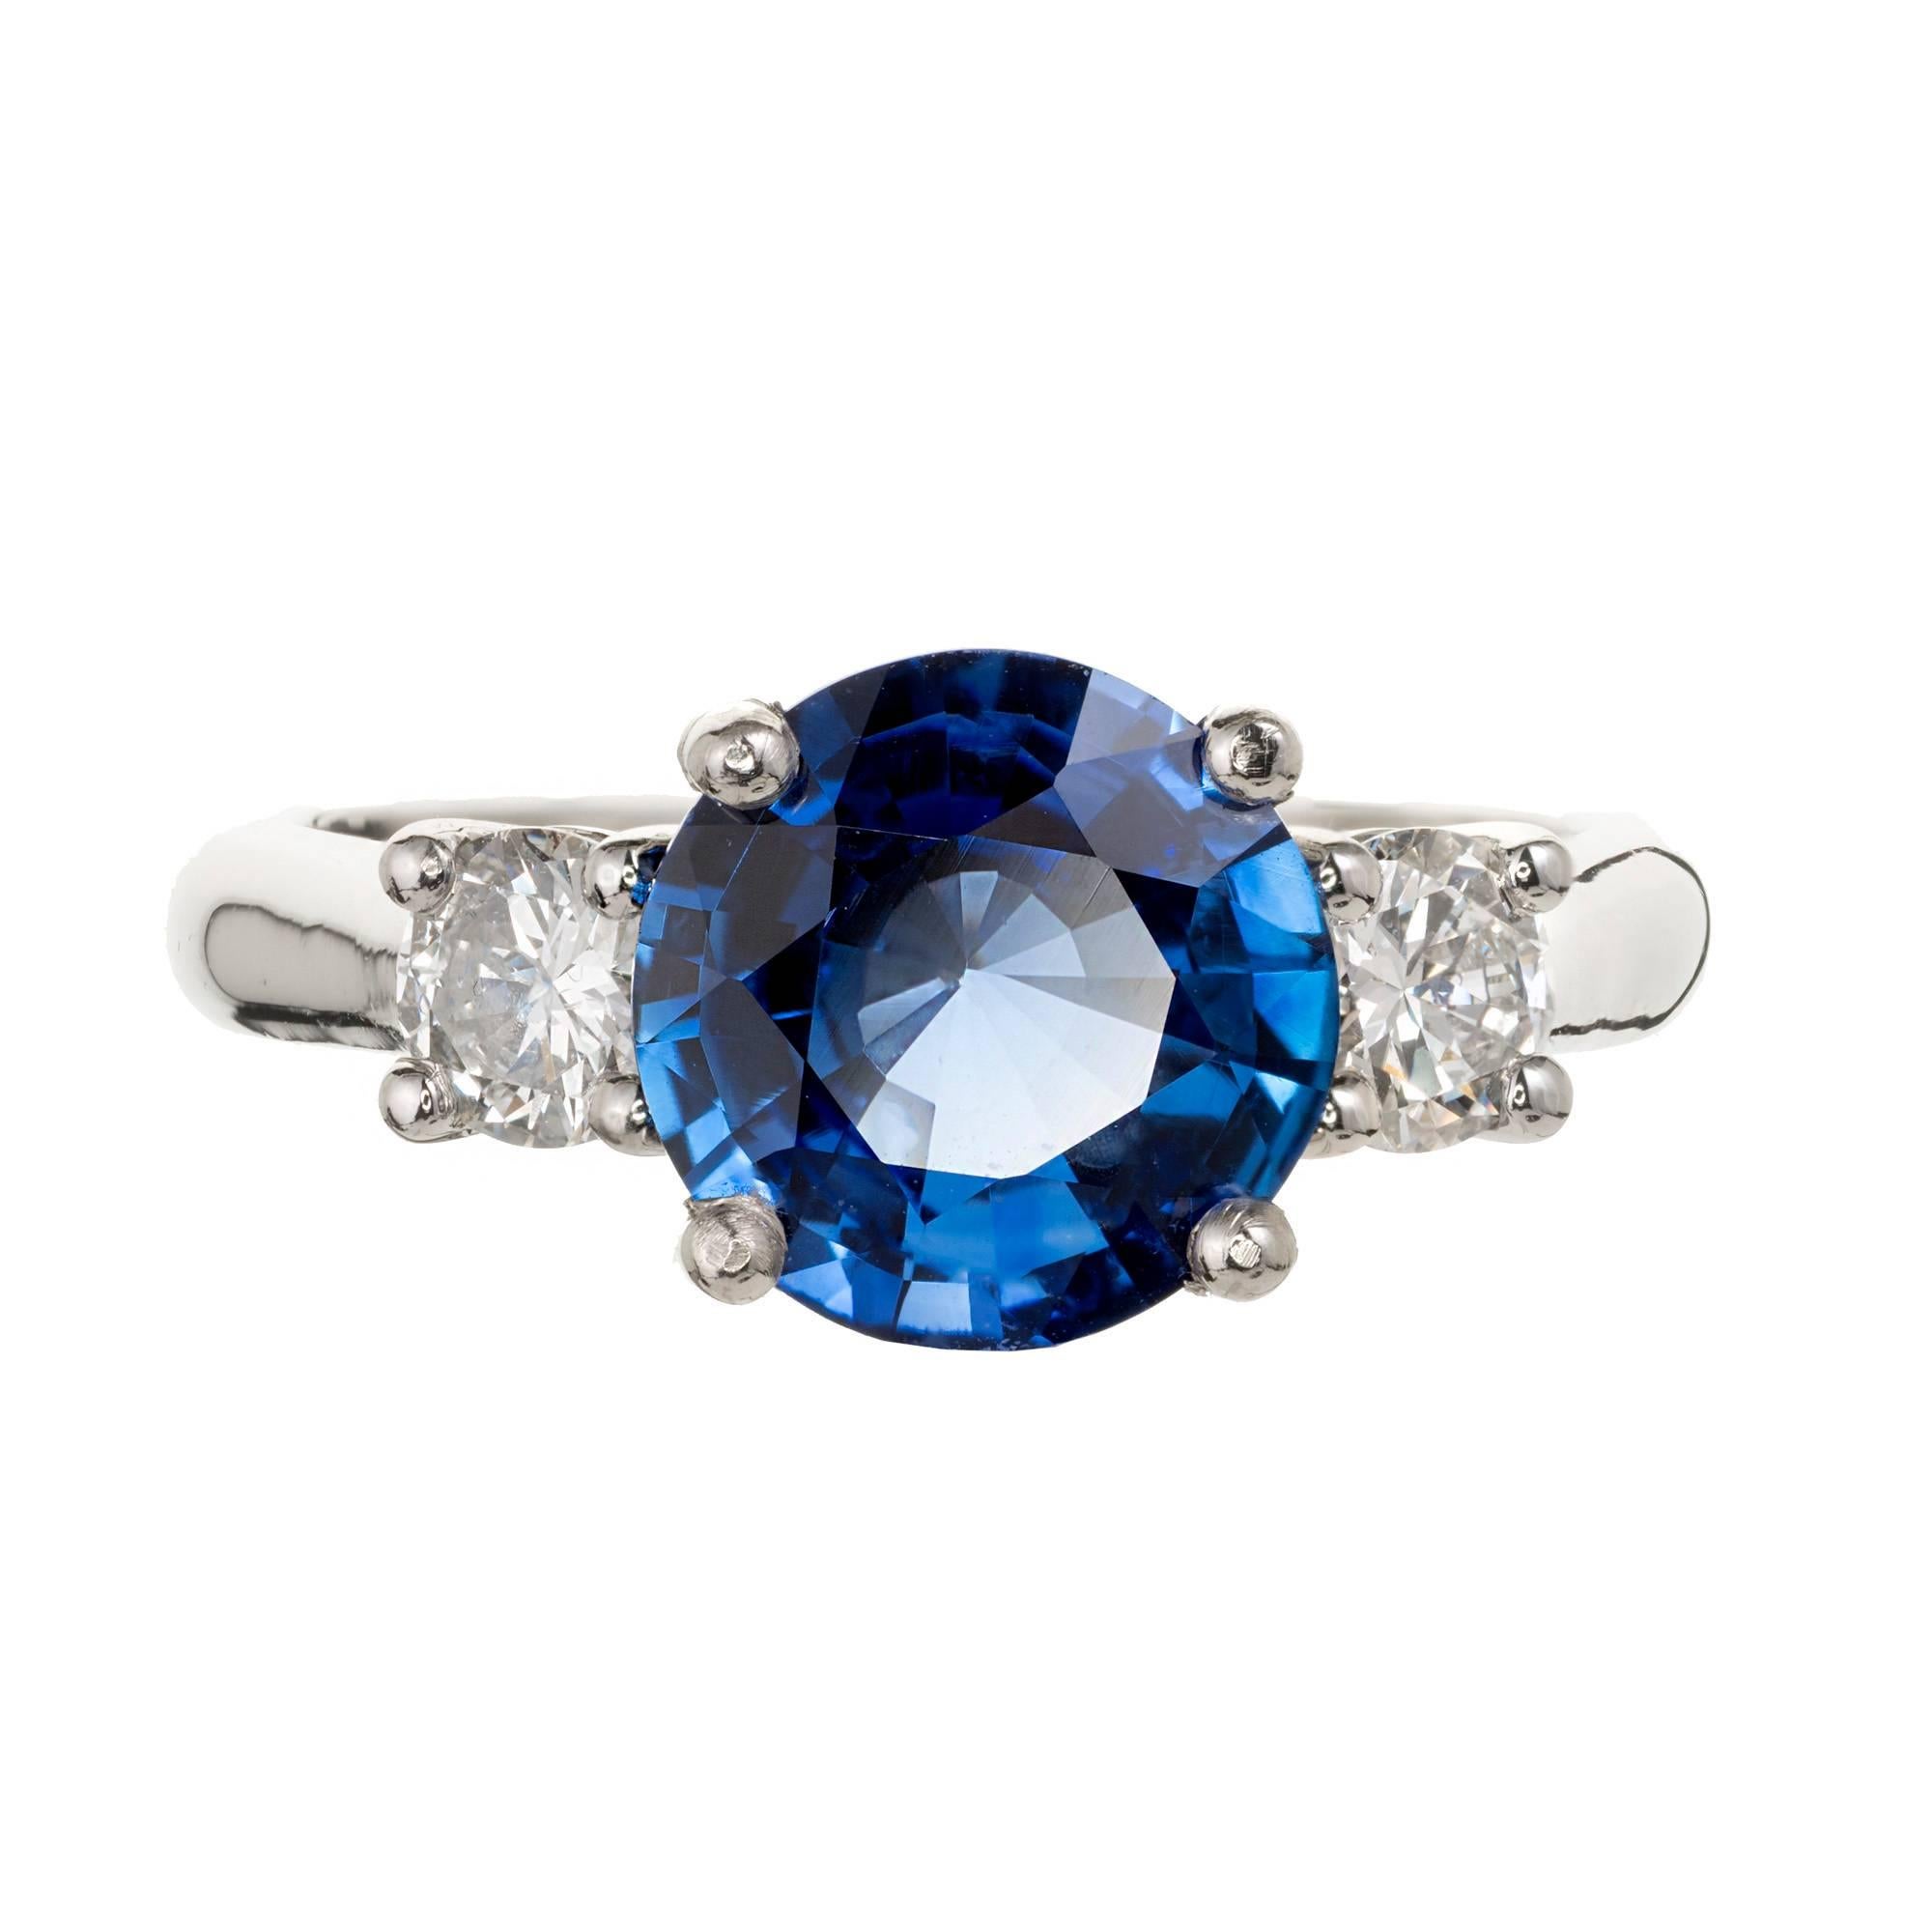 Peter Suchy blue Ceylon Sapphire Platinum diamond three-stone engagement ring. Round bright blue GIA certified natural Sapphire simple heat only. Classic Platinum diamond 3 stone setting.

1 round blue Ceylon Sapphire, approx. total weight 2.19cts,